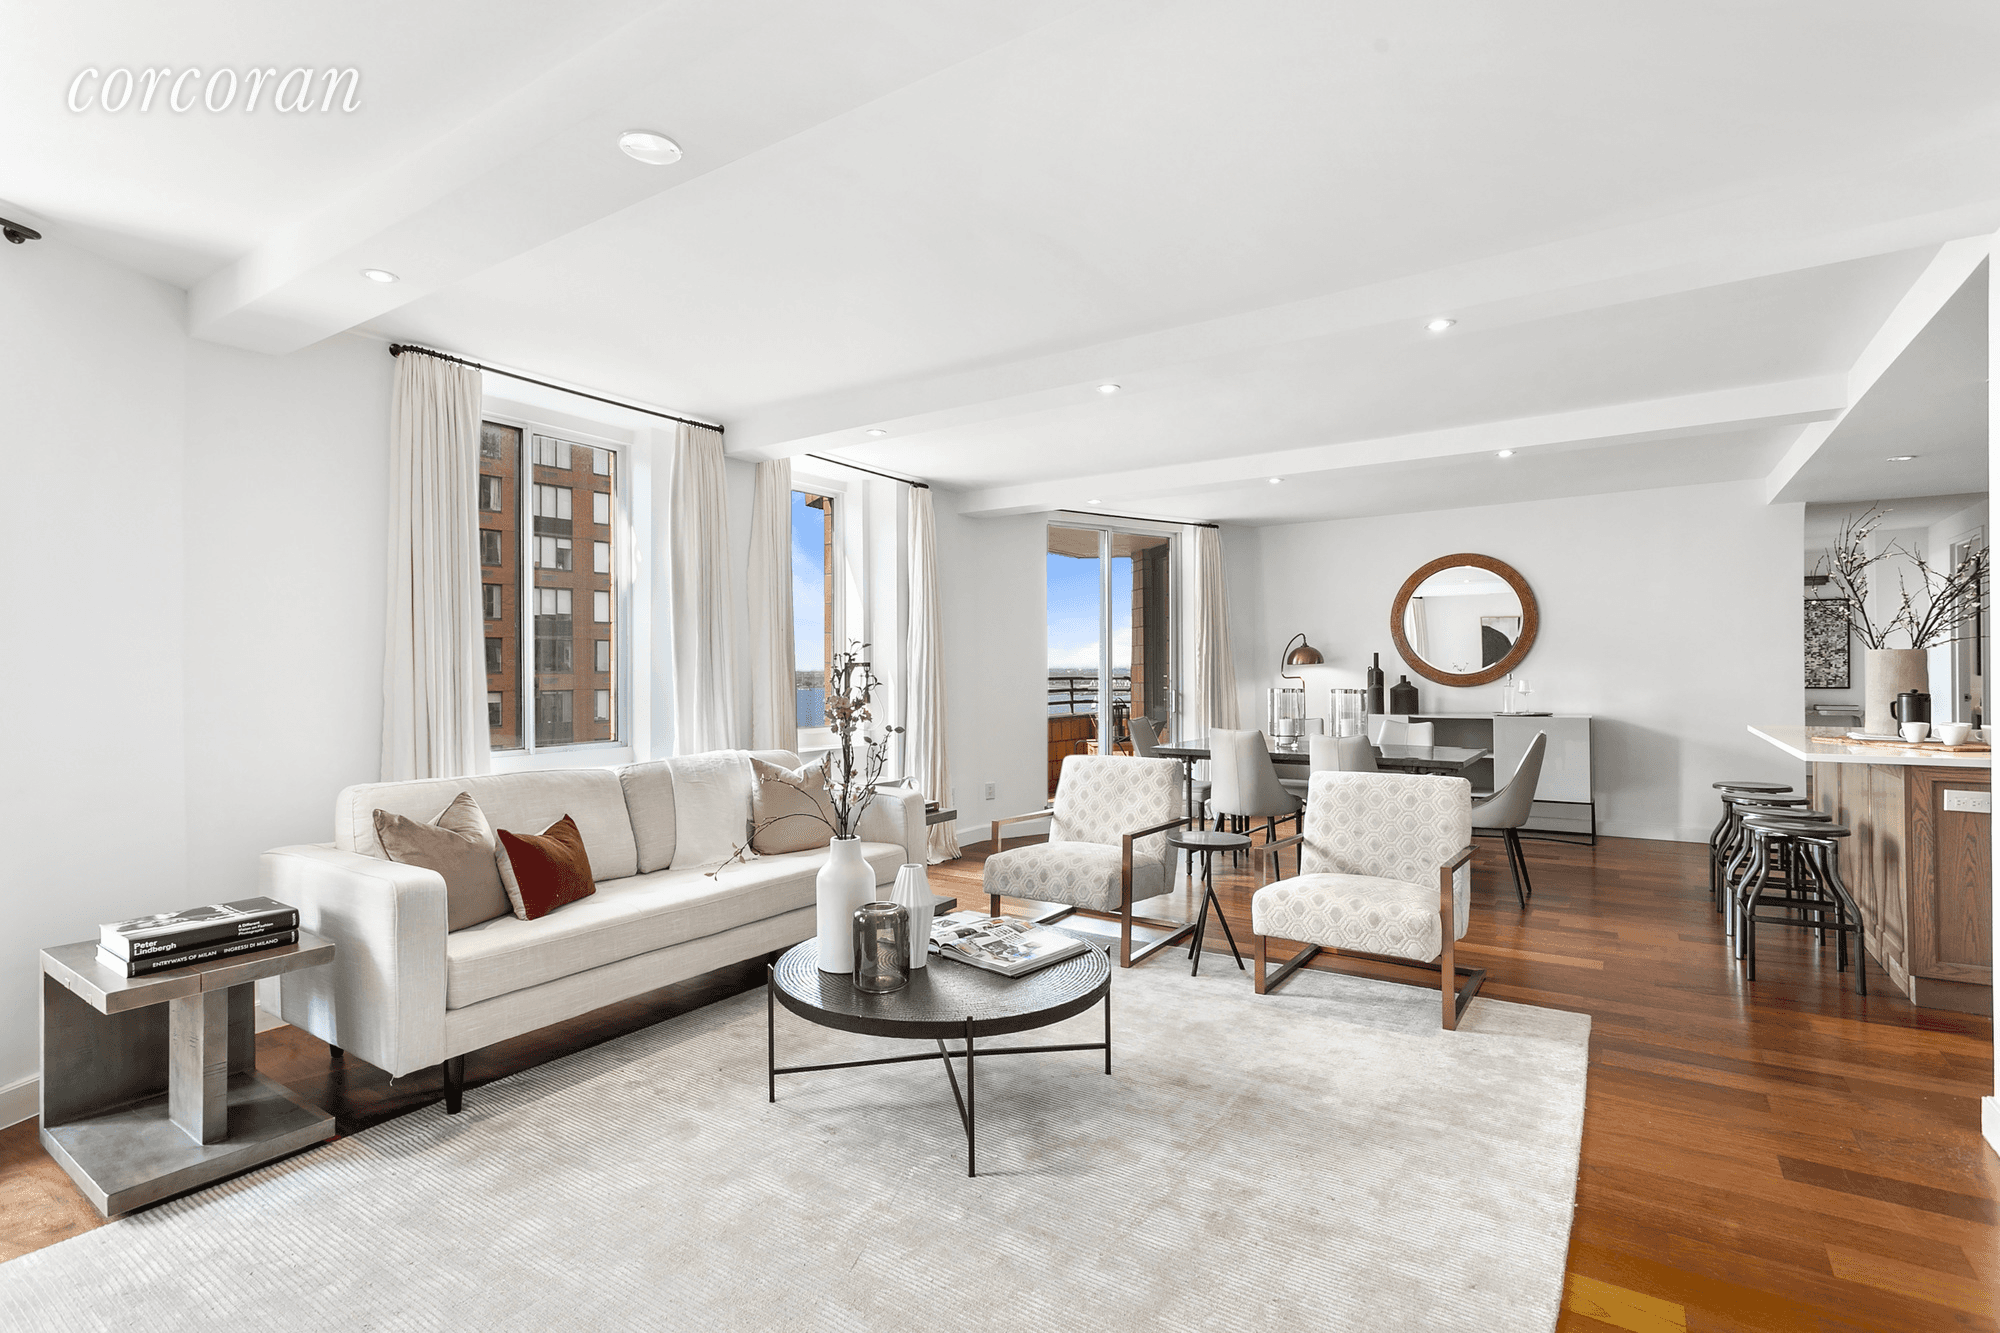 Surround yourself in stunning interiors and glorious water views in this expansive three bedroom, two and a half bathroom home in one of Battery Park City's best full service condominiums.